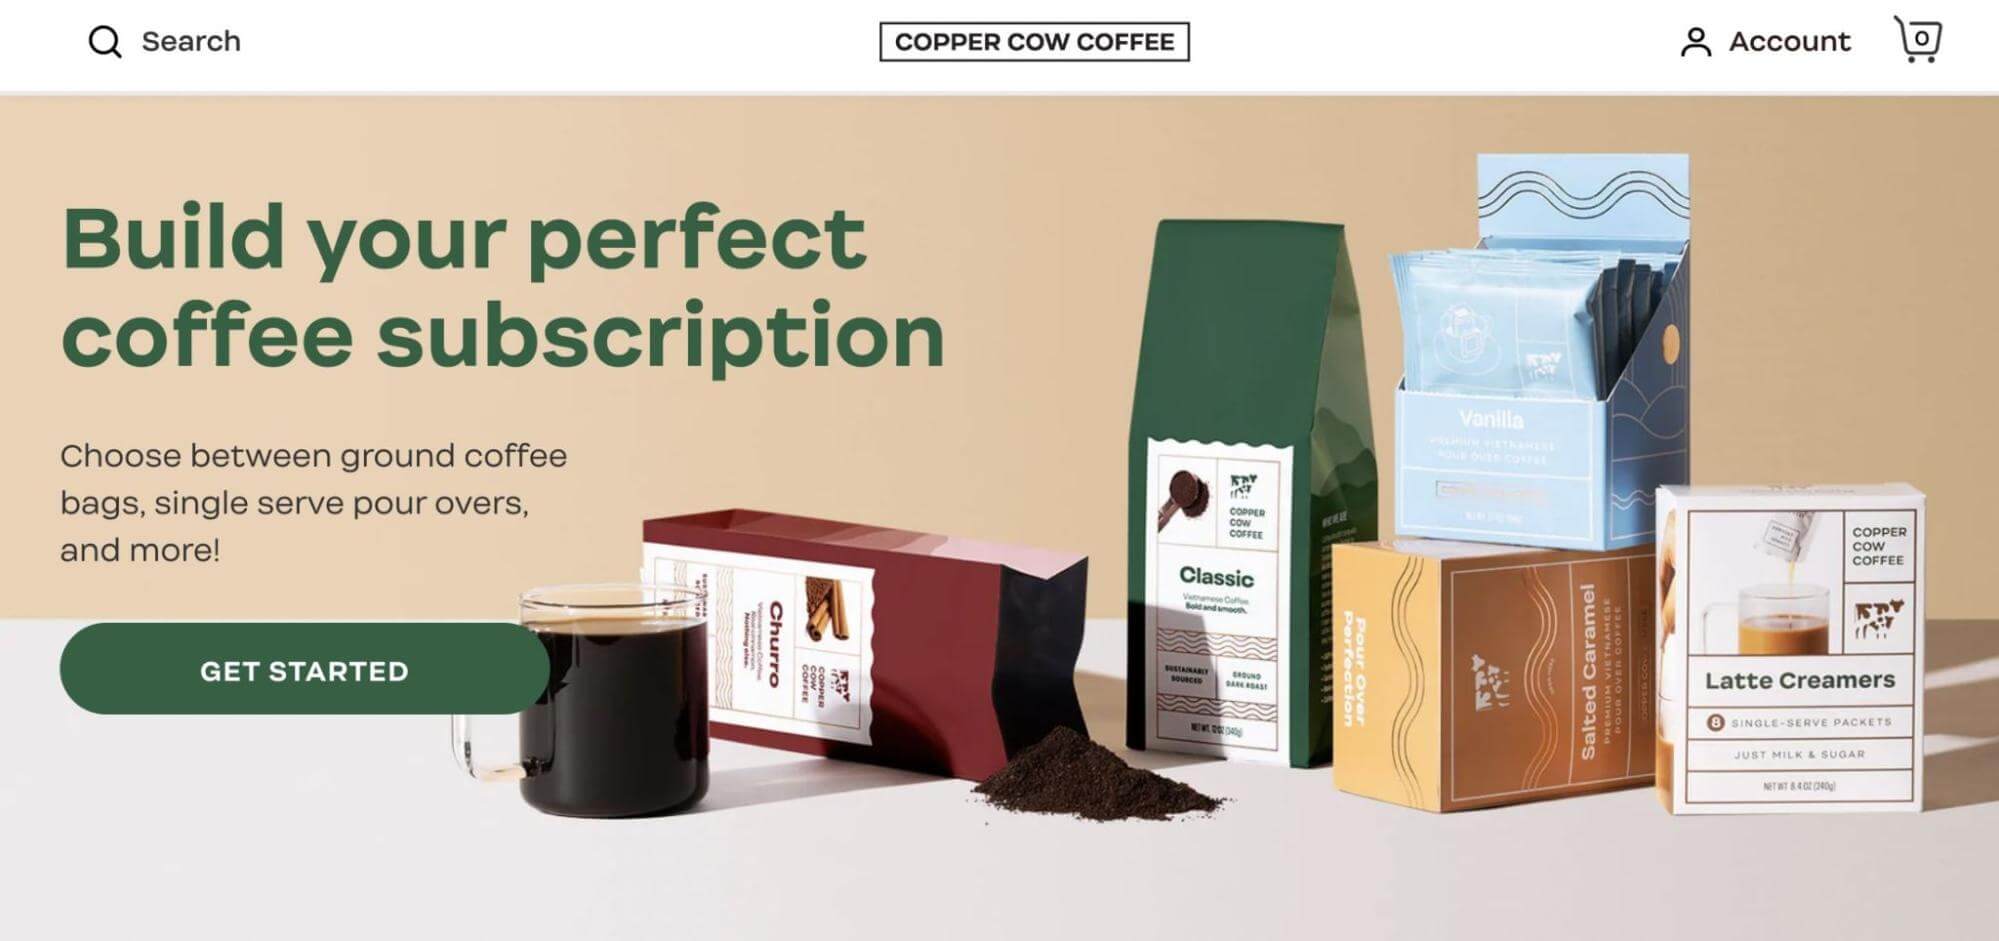 Copper Cow Coffee landing page